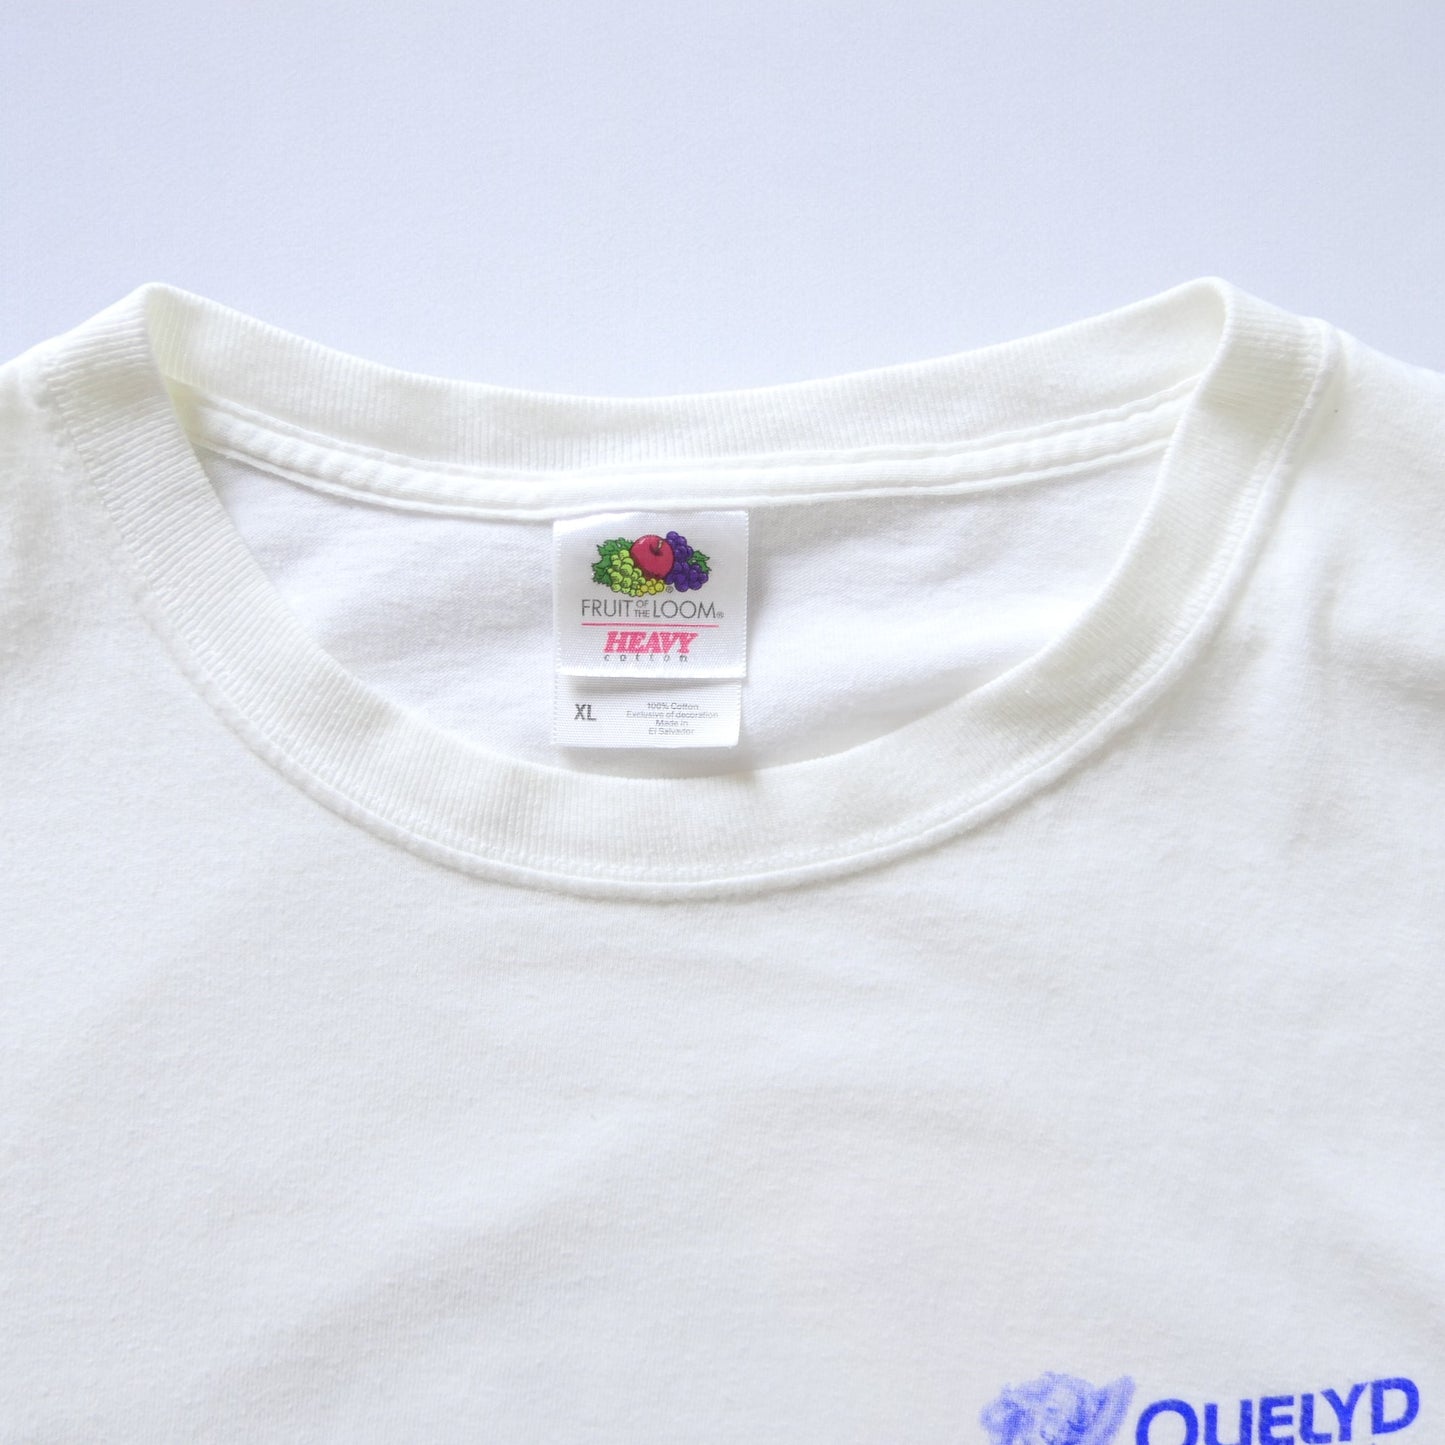 USED XL Promotion Tee -QUELYD-